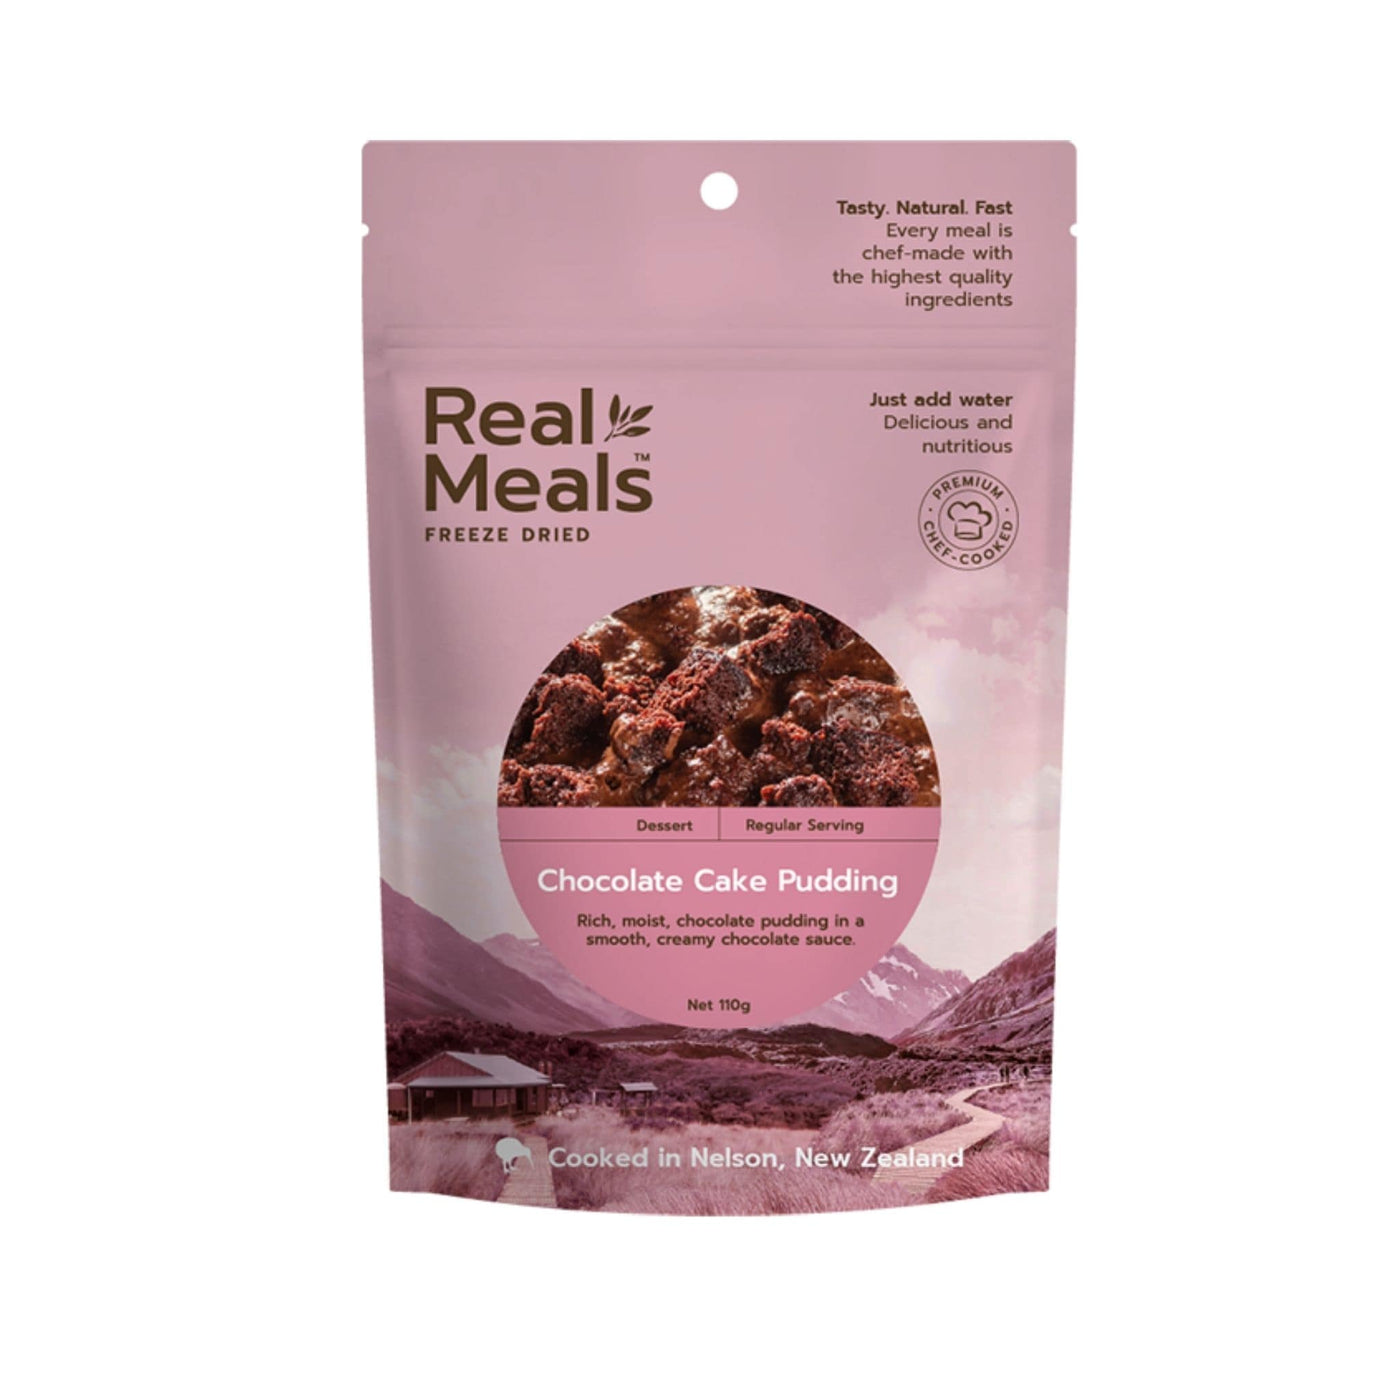 Real Meals Dessert - Chocolate Cake Pudding | Freeze Dries Meals | Further Faster Christchurch NZ